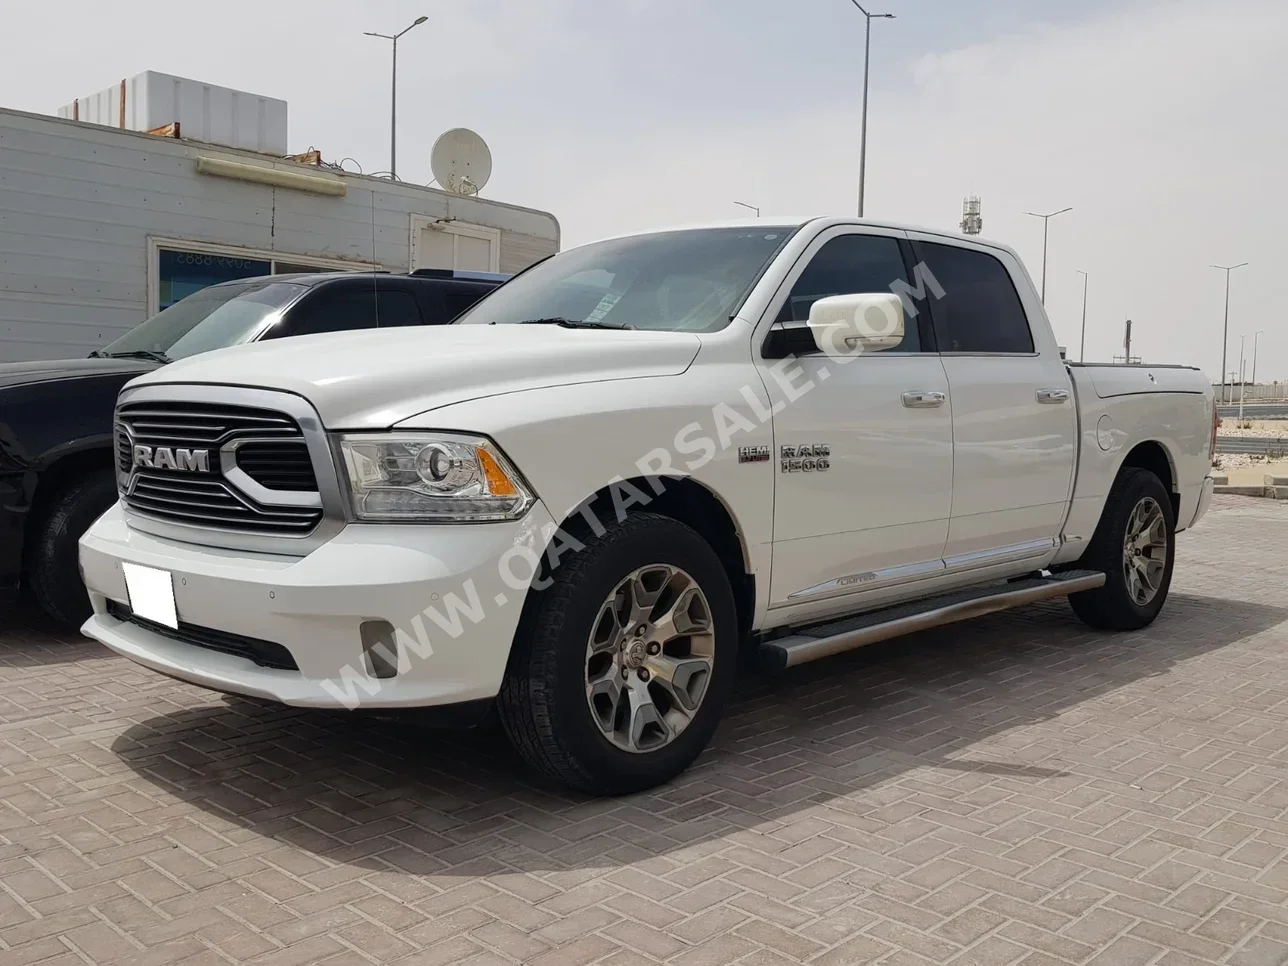 Dodge  Ram  Limited  2017  Automatic  251,000 Km  8 Cylinder  Four Wheel Drive (4WD)  Pick Up  White